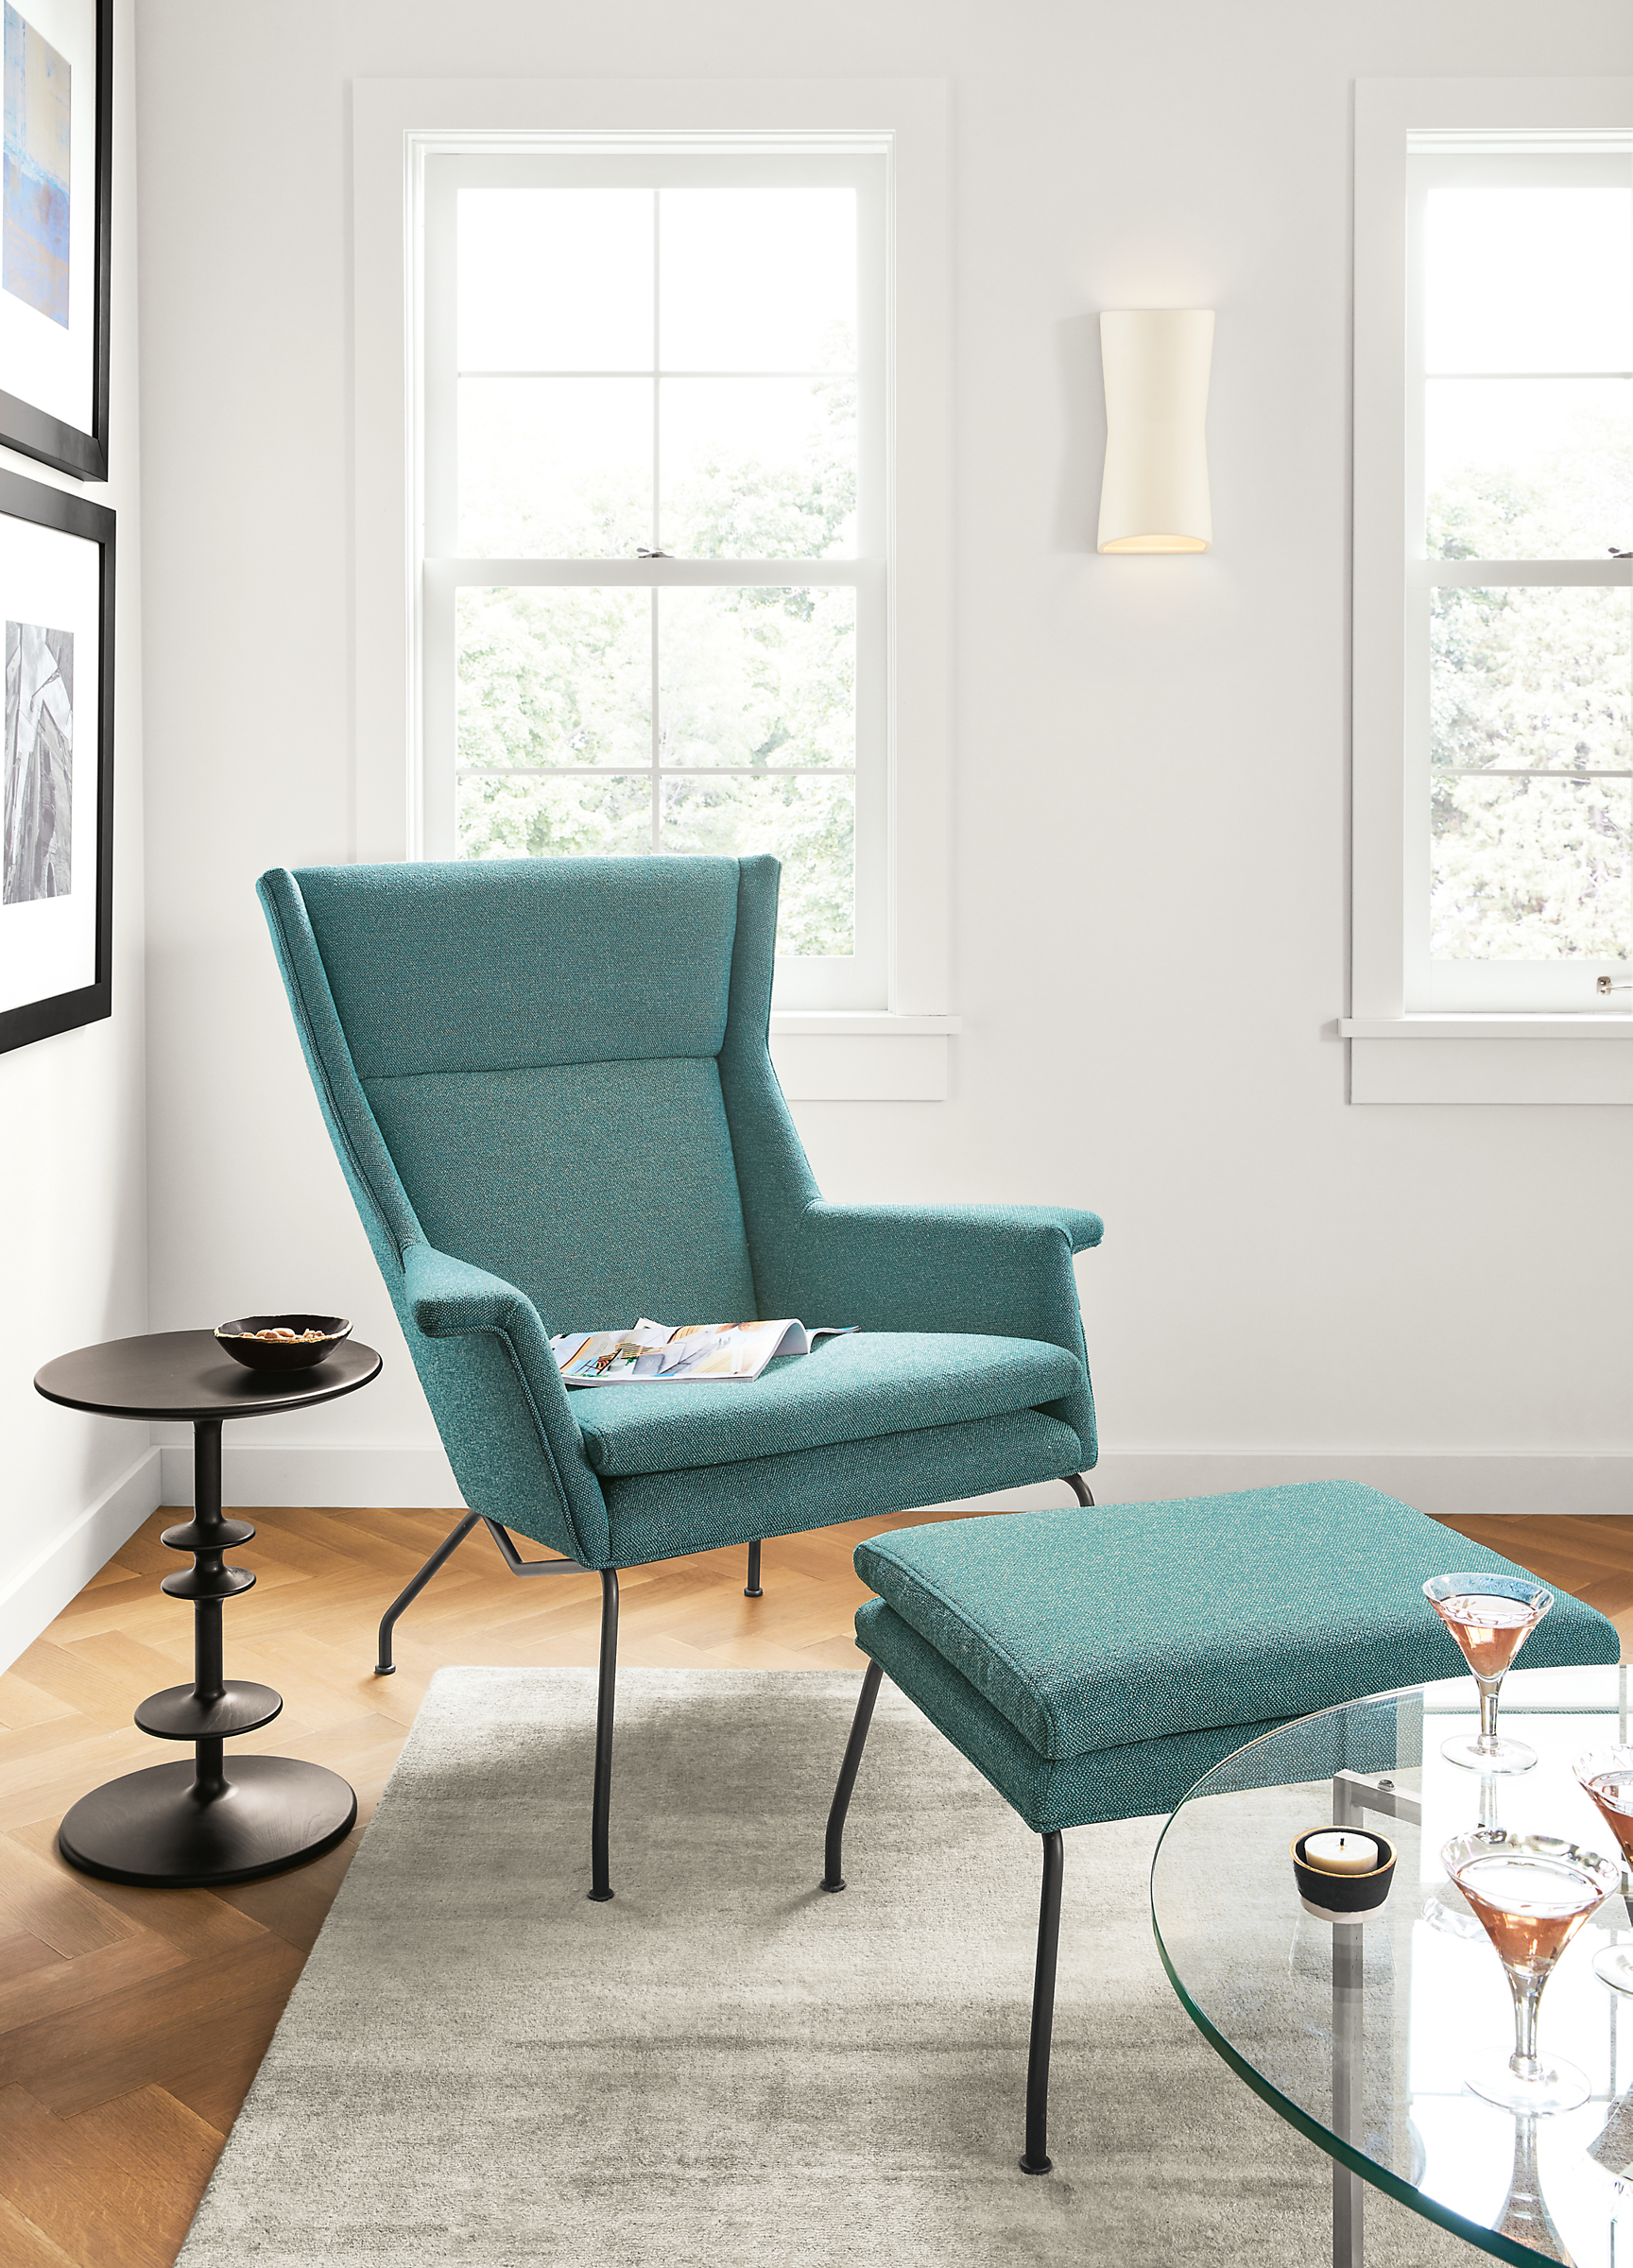 Detail of Aidan chair in Tatum teal fabric with ottoman.